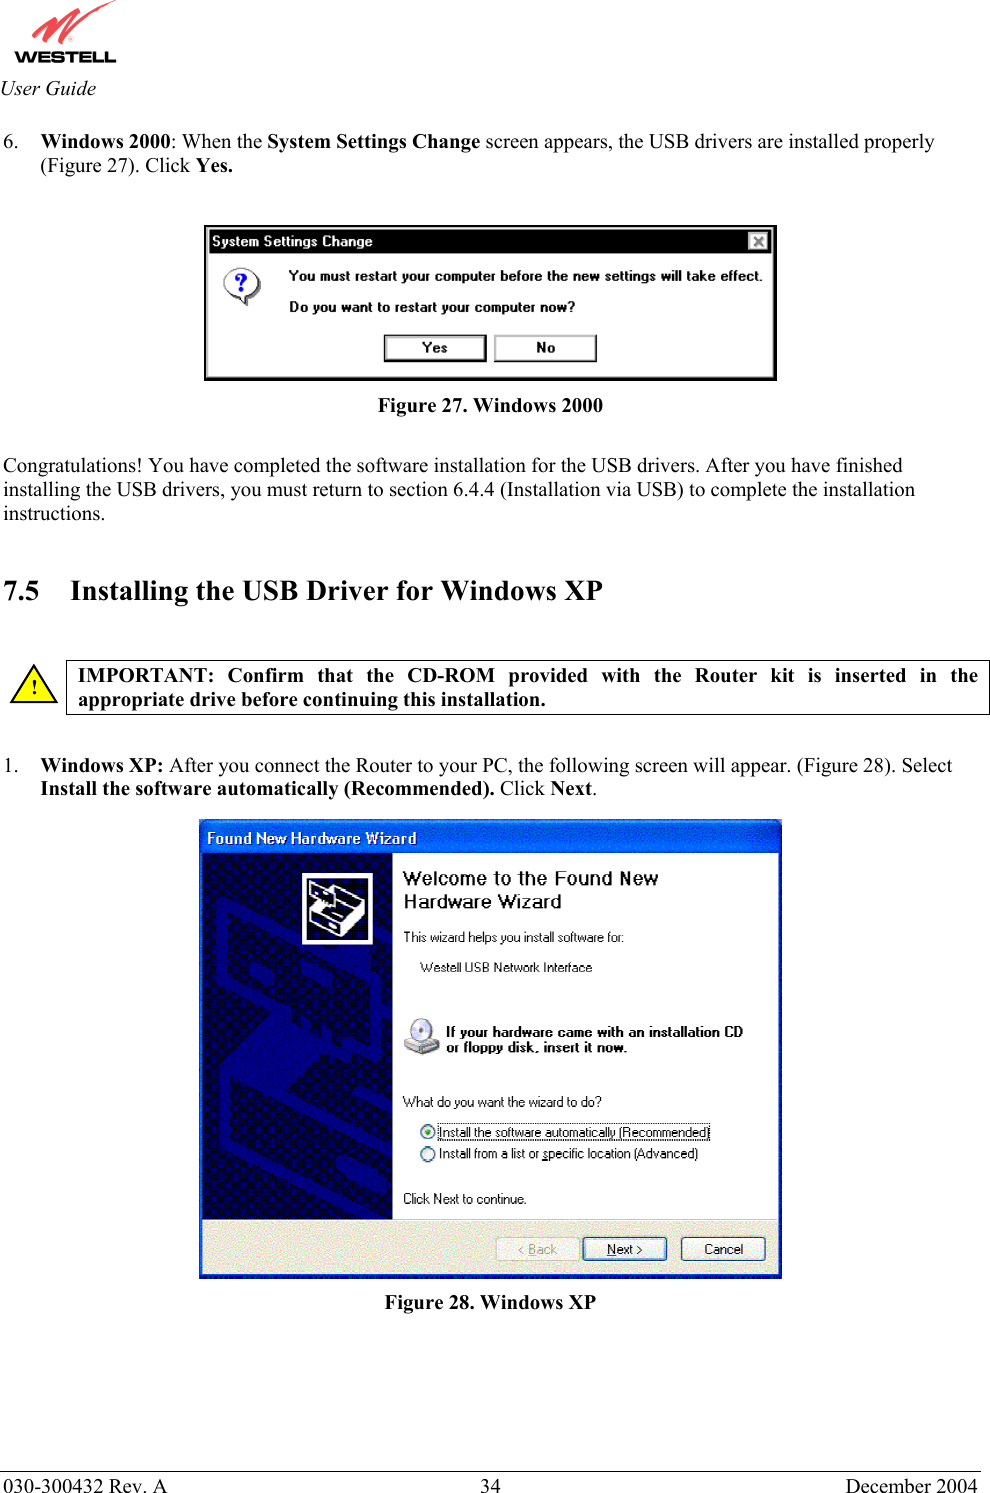       030-300432 Rev. A  34 December 2004  User Guide 6.  Windows 2000: When the System Settings Change screen appears, the USB drivers are installed properly (Figure 27). Click Yes.   Figure 27. Windows 2000  Congratulations! You have completed the software installation for the USB drivers. After you have finished installing the USB drivers, you must return to section 6.4.4 (Installation via USB) to complete the installation instructions.    7.5   Installing the USB Driver for Windows XP   IMPORTANT: Confirm that the CD-ROM provided with the Router kit is inserted in the appropriate drive before continuing this installation.    1.  Windows XP: After you connect the Router to your PC, the following screen will appear. (Figure 28). Select Install the software automatically (Recommended). Click Next.    Figure 28. Windows XP        ! 